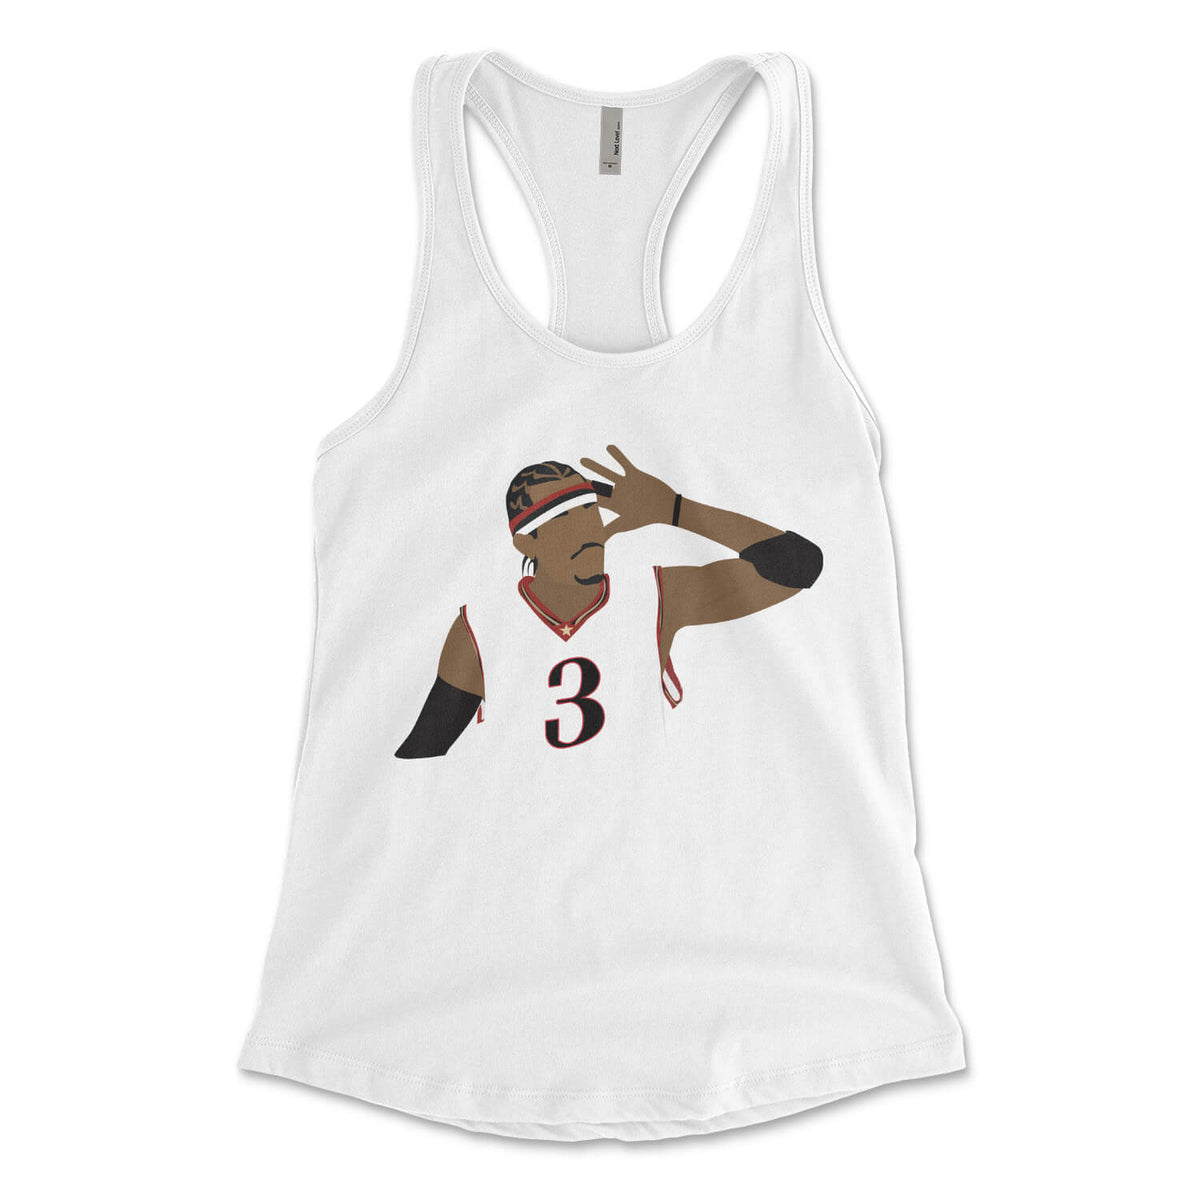 Philadelphia 76ers Allen Iverson Sixers womens white racerback tank top from Phillygoat